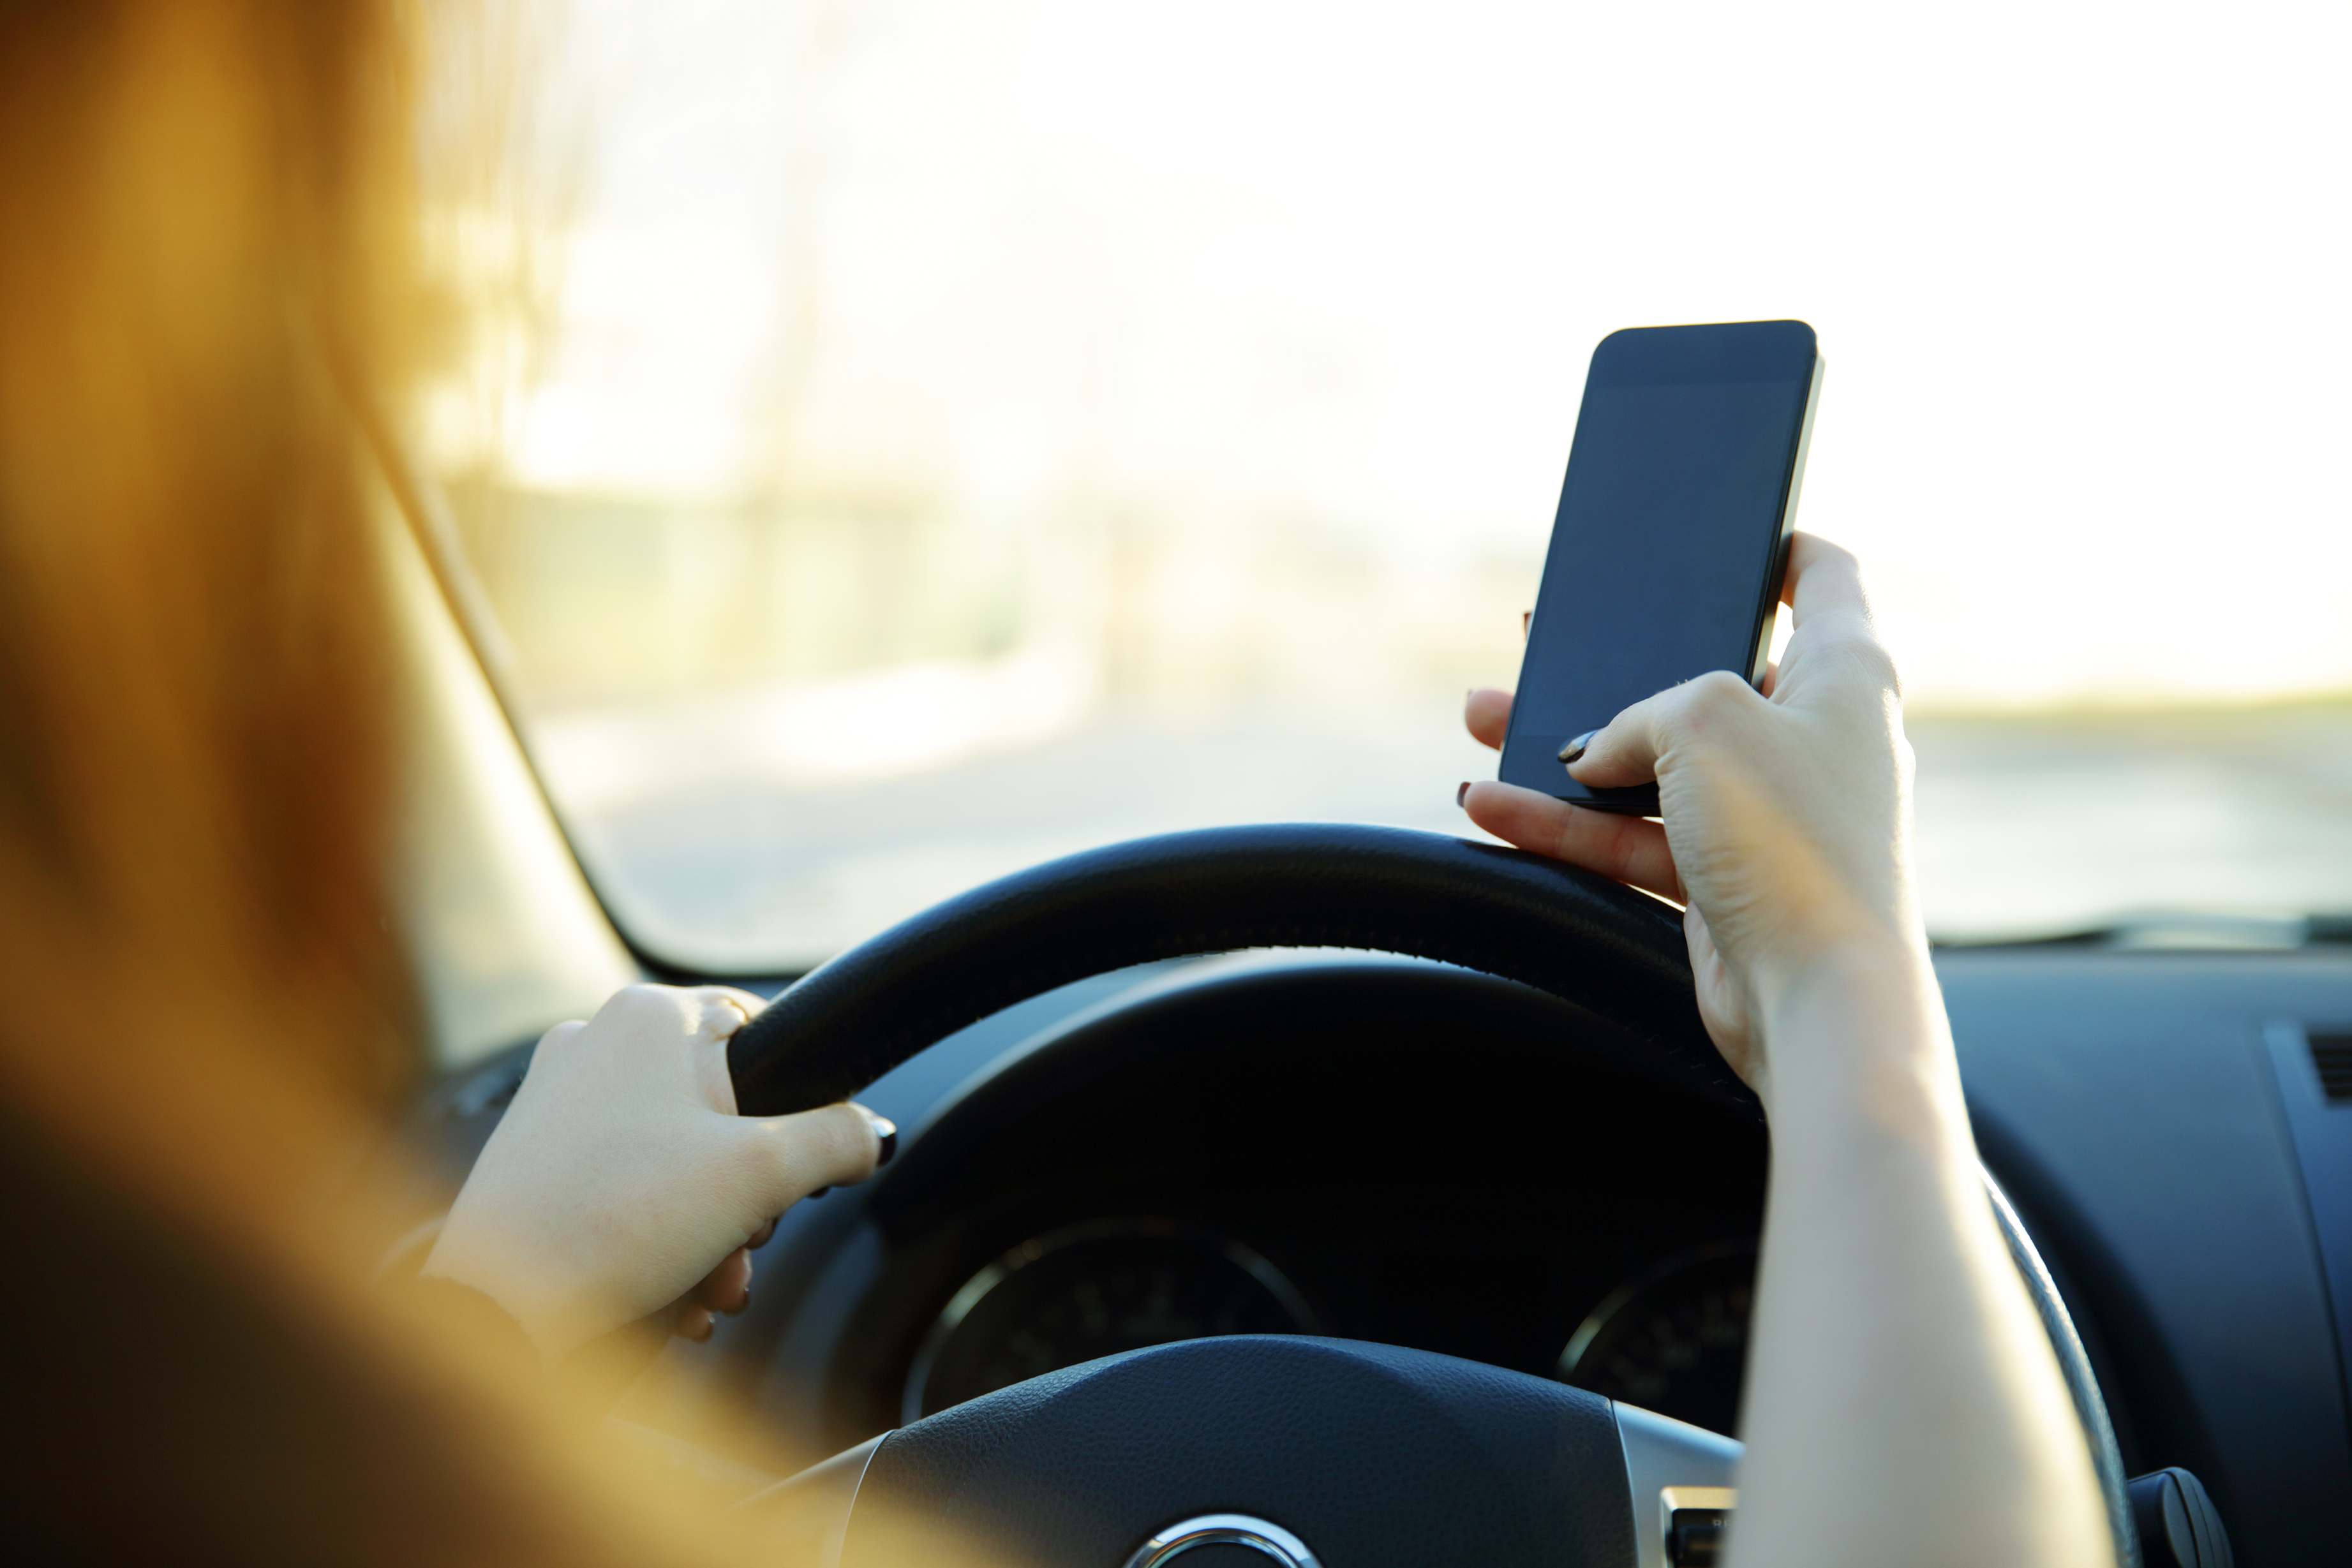 Texting and Handheld Phone Law For Florida Drivers Starting 2020